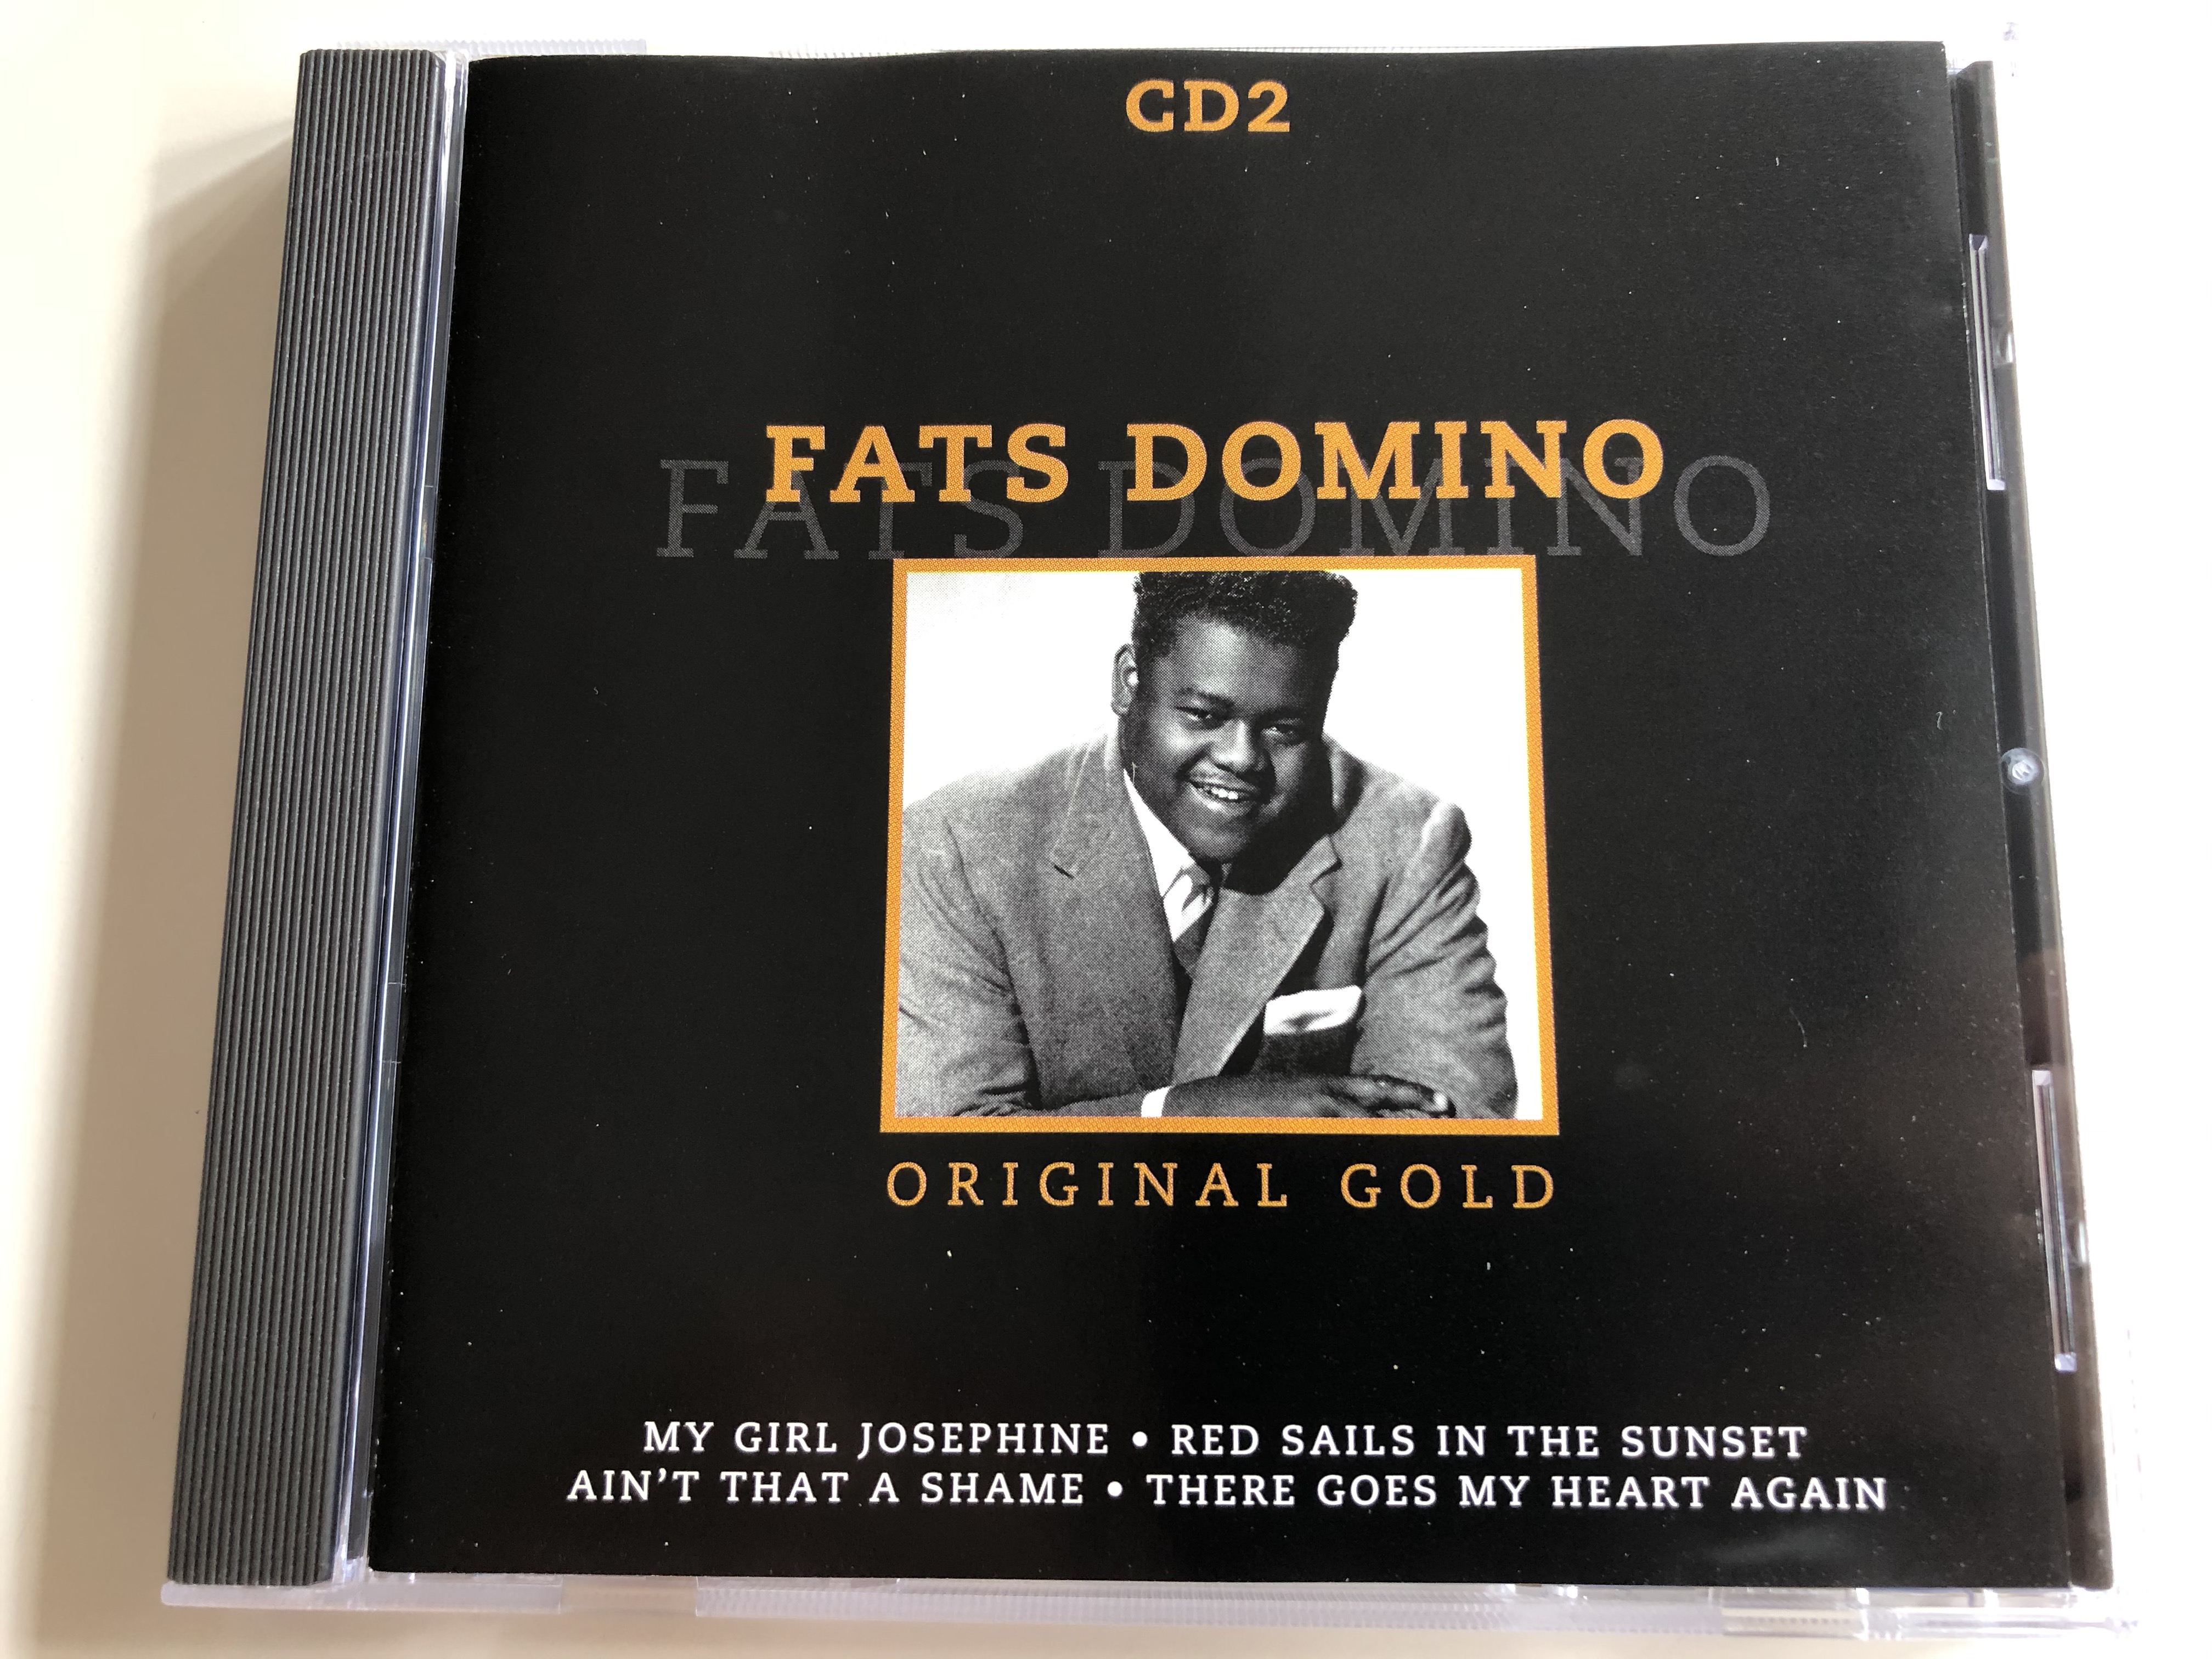 fats-domino-original-gold-cd-2-my-girl-josephine-red-sails-in-the-sunset-ain-t-that-a-shame-there-goes-my-heart-again-disky-audio-cd-1998-bx-853912-1-.jpg